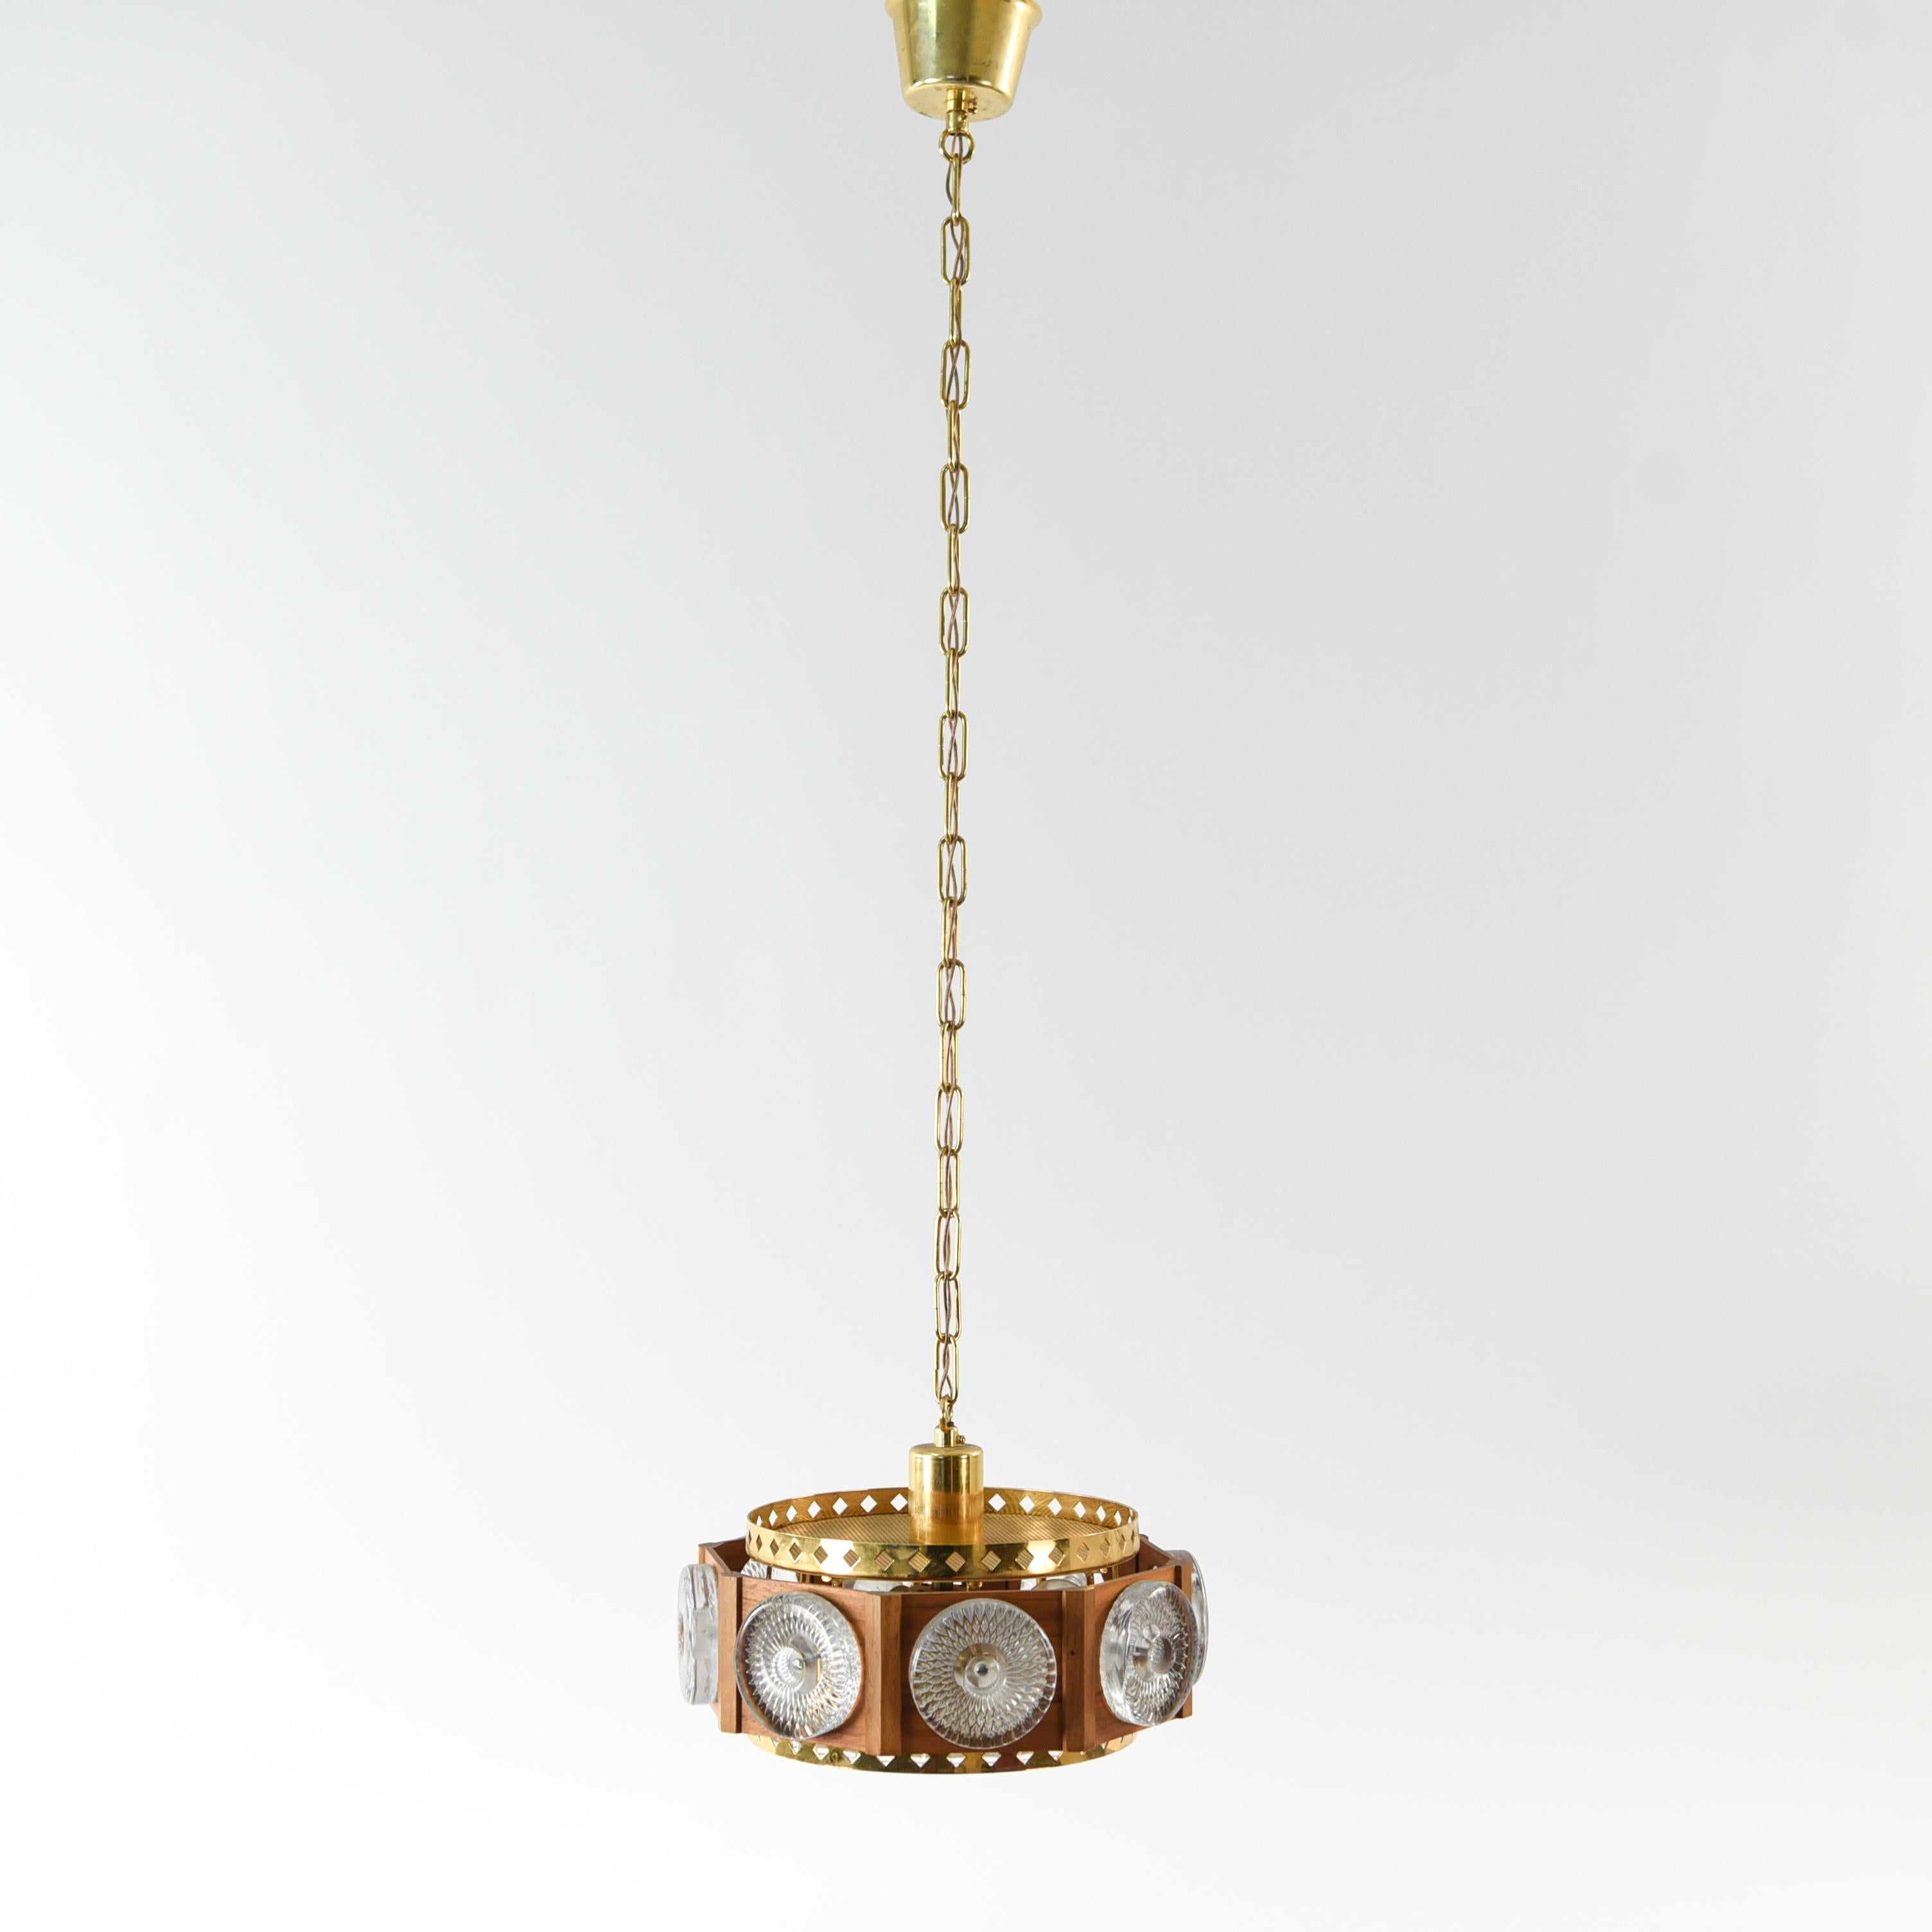 This is a beautiful Swedish midcentury pendant chandelier designed by Carl Fagerlund for Orrefors. This piece is unusual as it incorporates a teak wood frame, unlike most of Fagerlund's designs which are solely brass and glass, and features textured